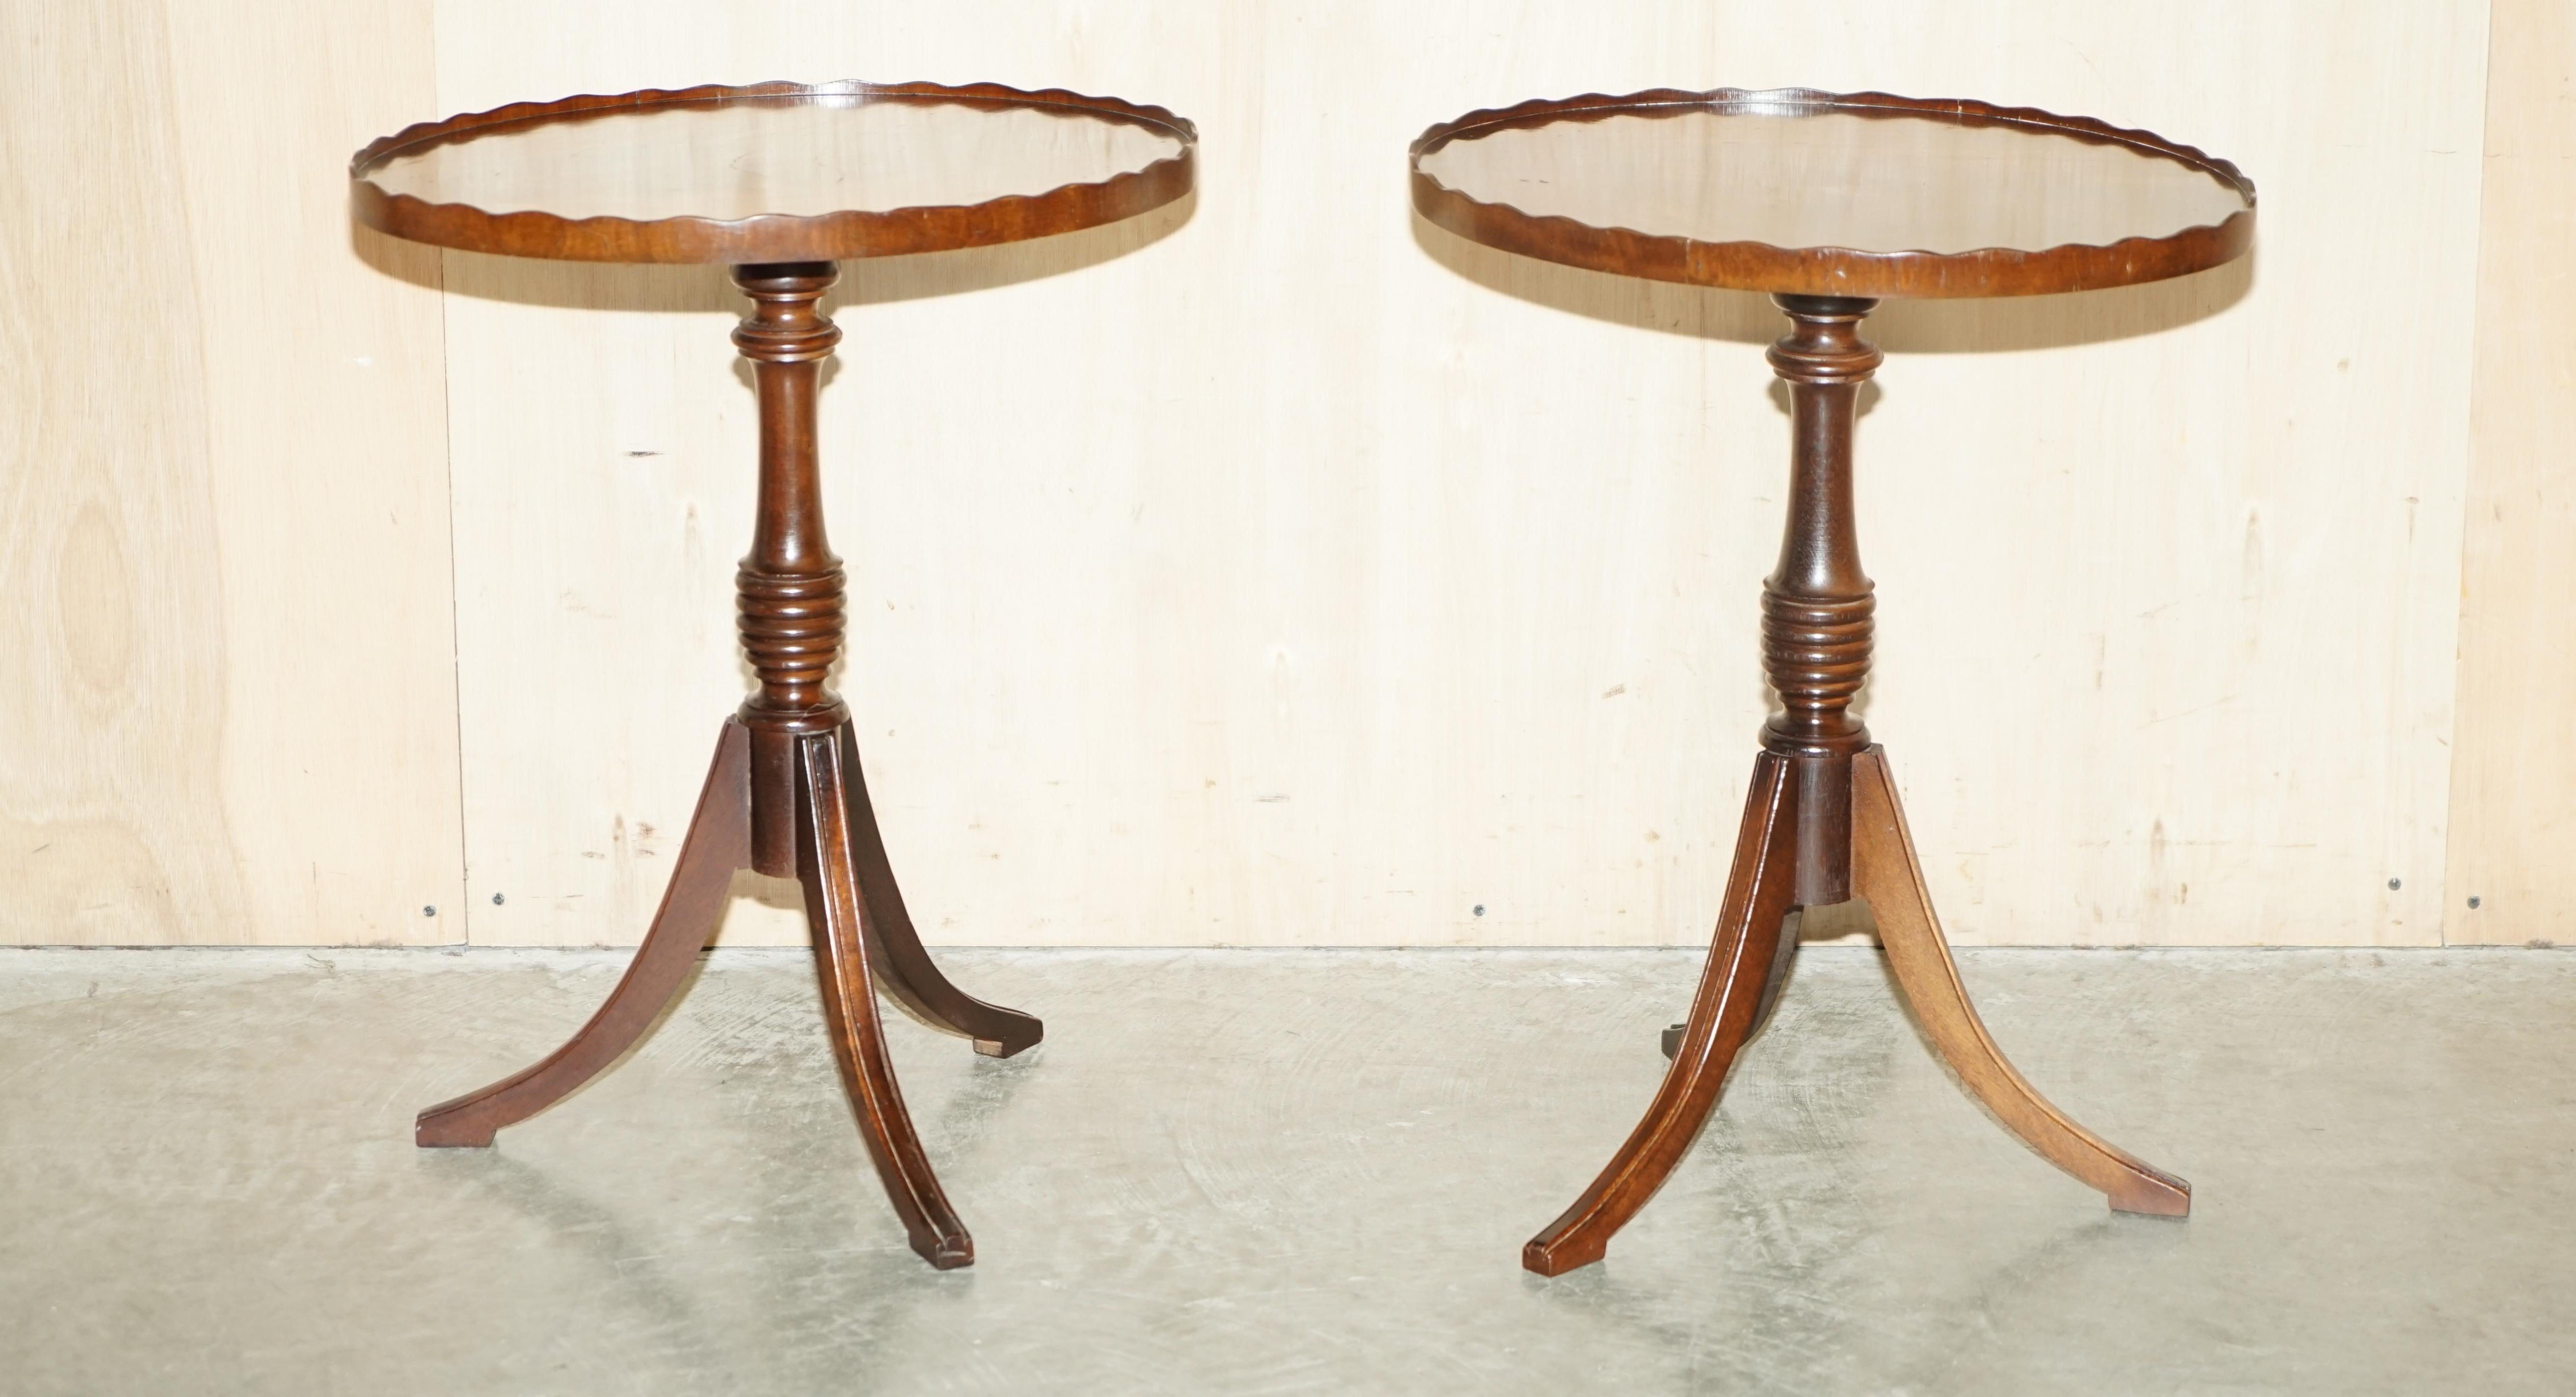 We are delighted to offer for sale this lovely pair of vintage, hand made in England, Beresford & Hicks Flamed Mahogany oval side tables

This pair are in sublime condition, the timber patina is exquisite, they have an oval top with a timber